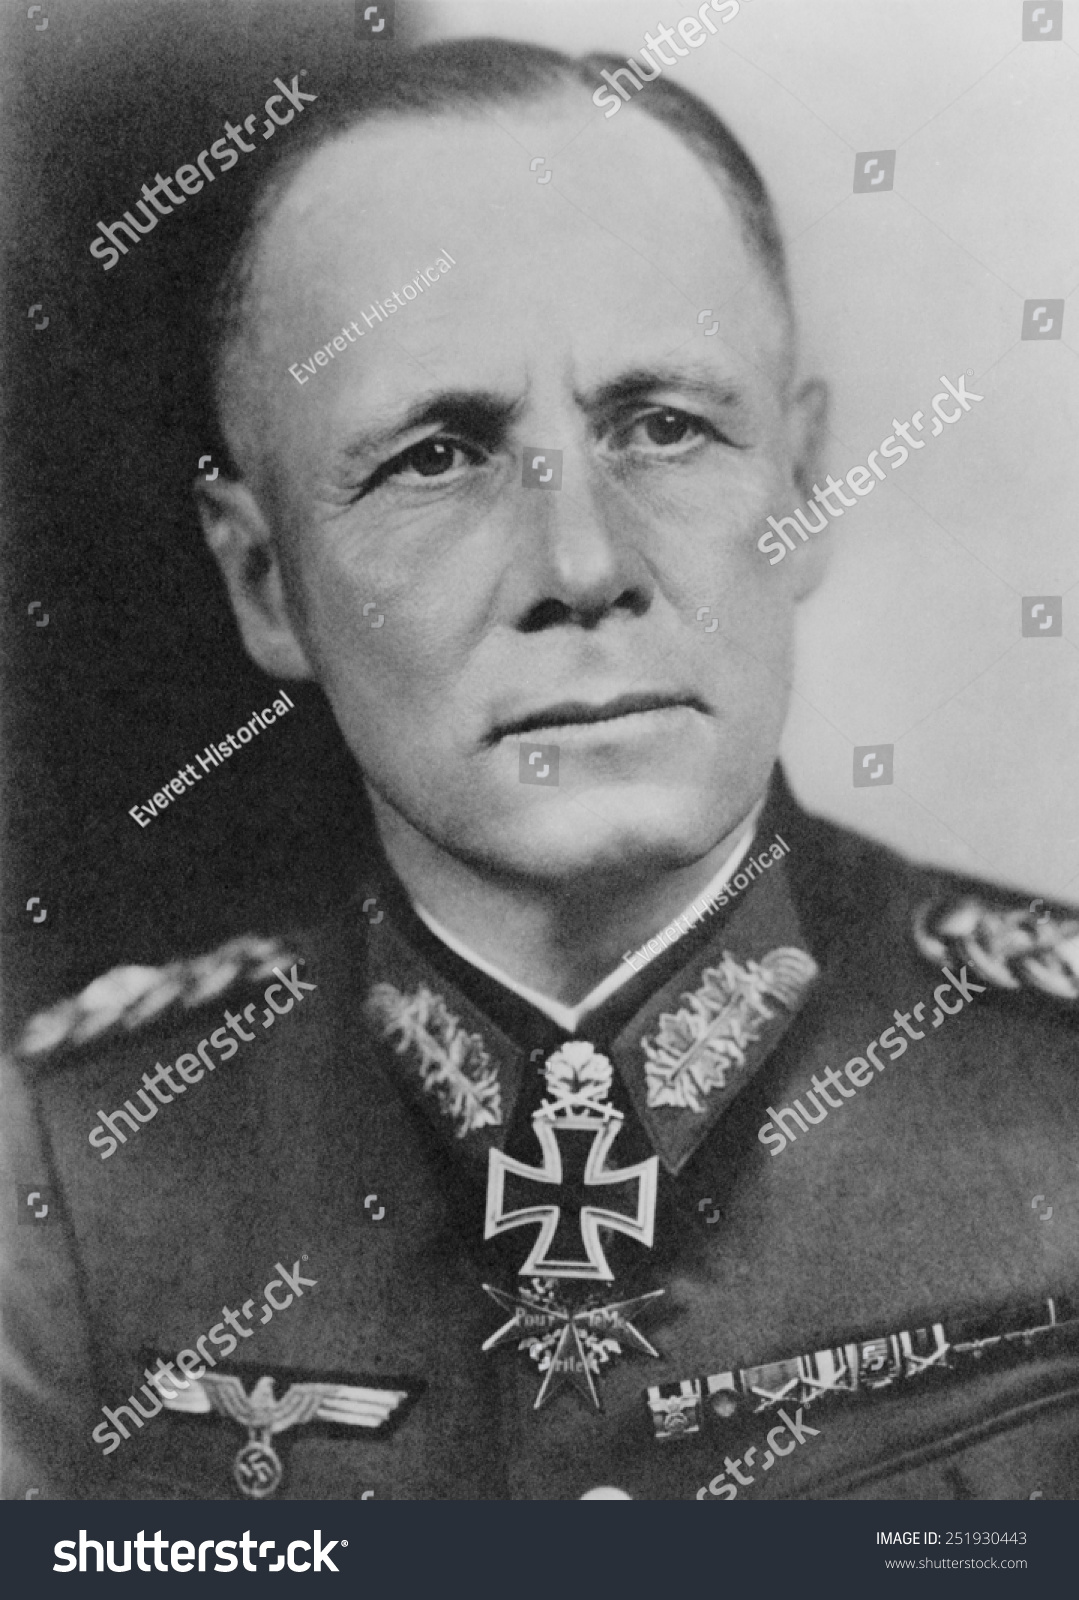 Field Marshall Erwin Rommel, German commander in France and North Africa during World War 2. Rommel had been part of Hitler's circle in 1938-39, but was never a member of the Nazi Party. Ca. 1940-44.